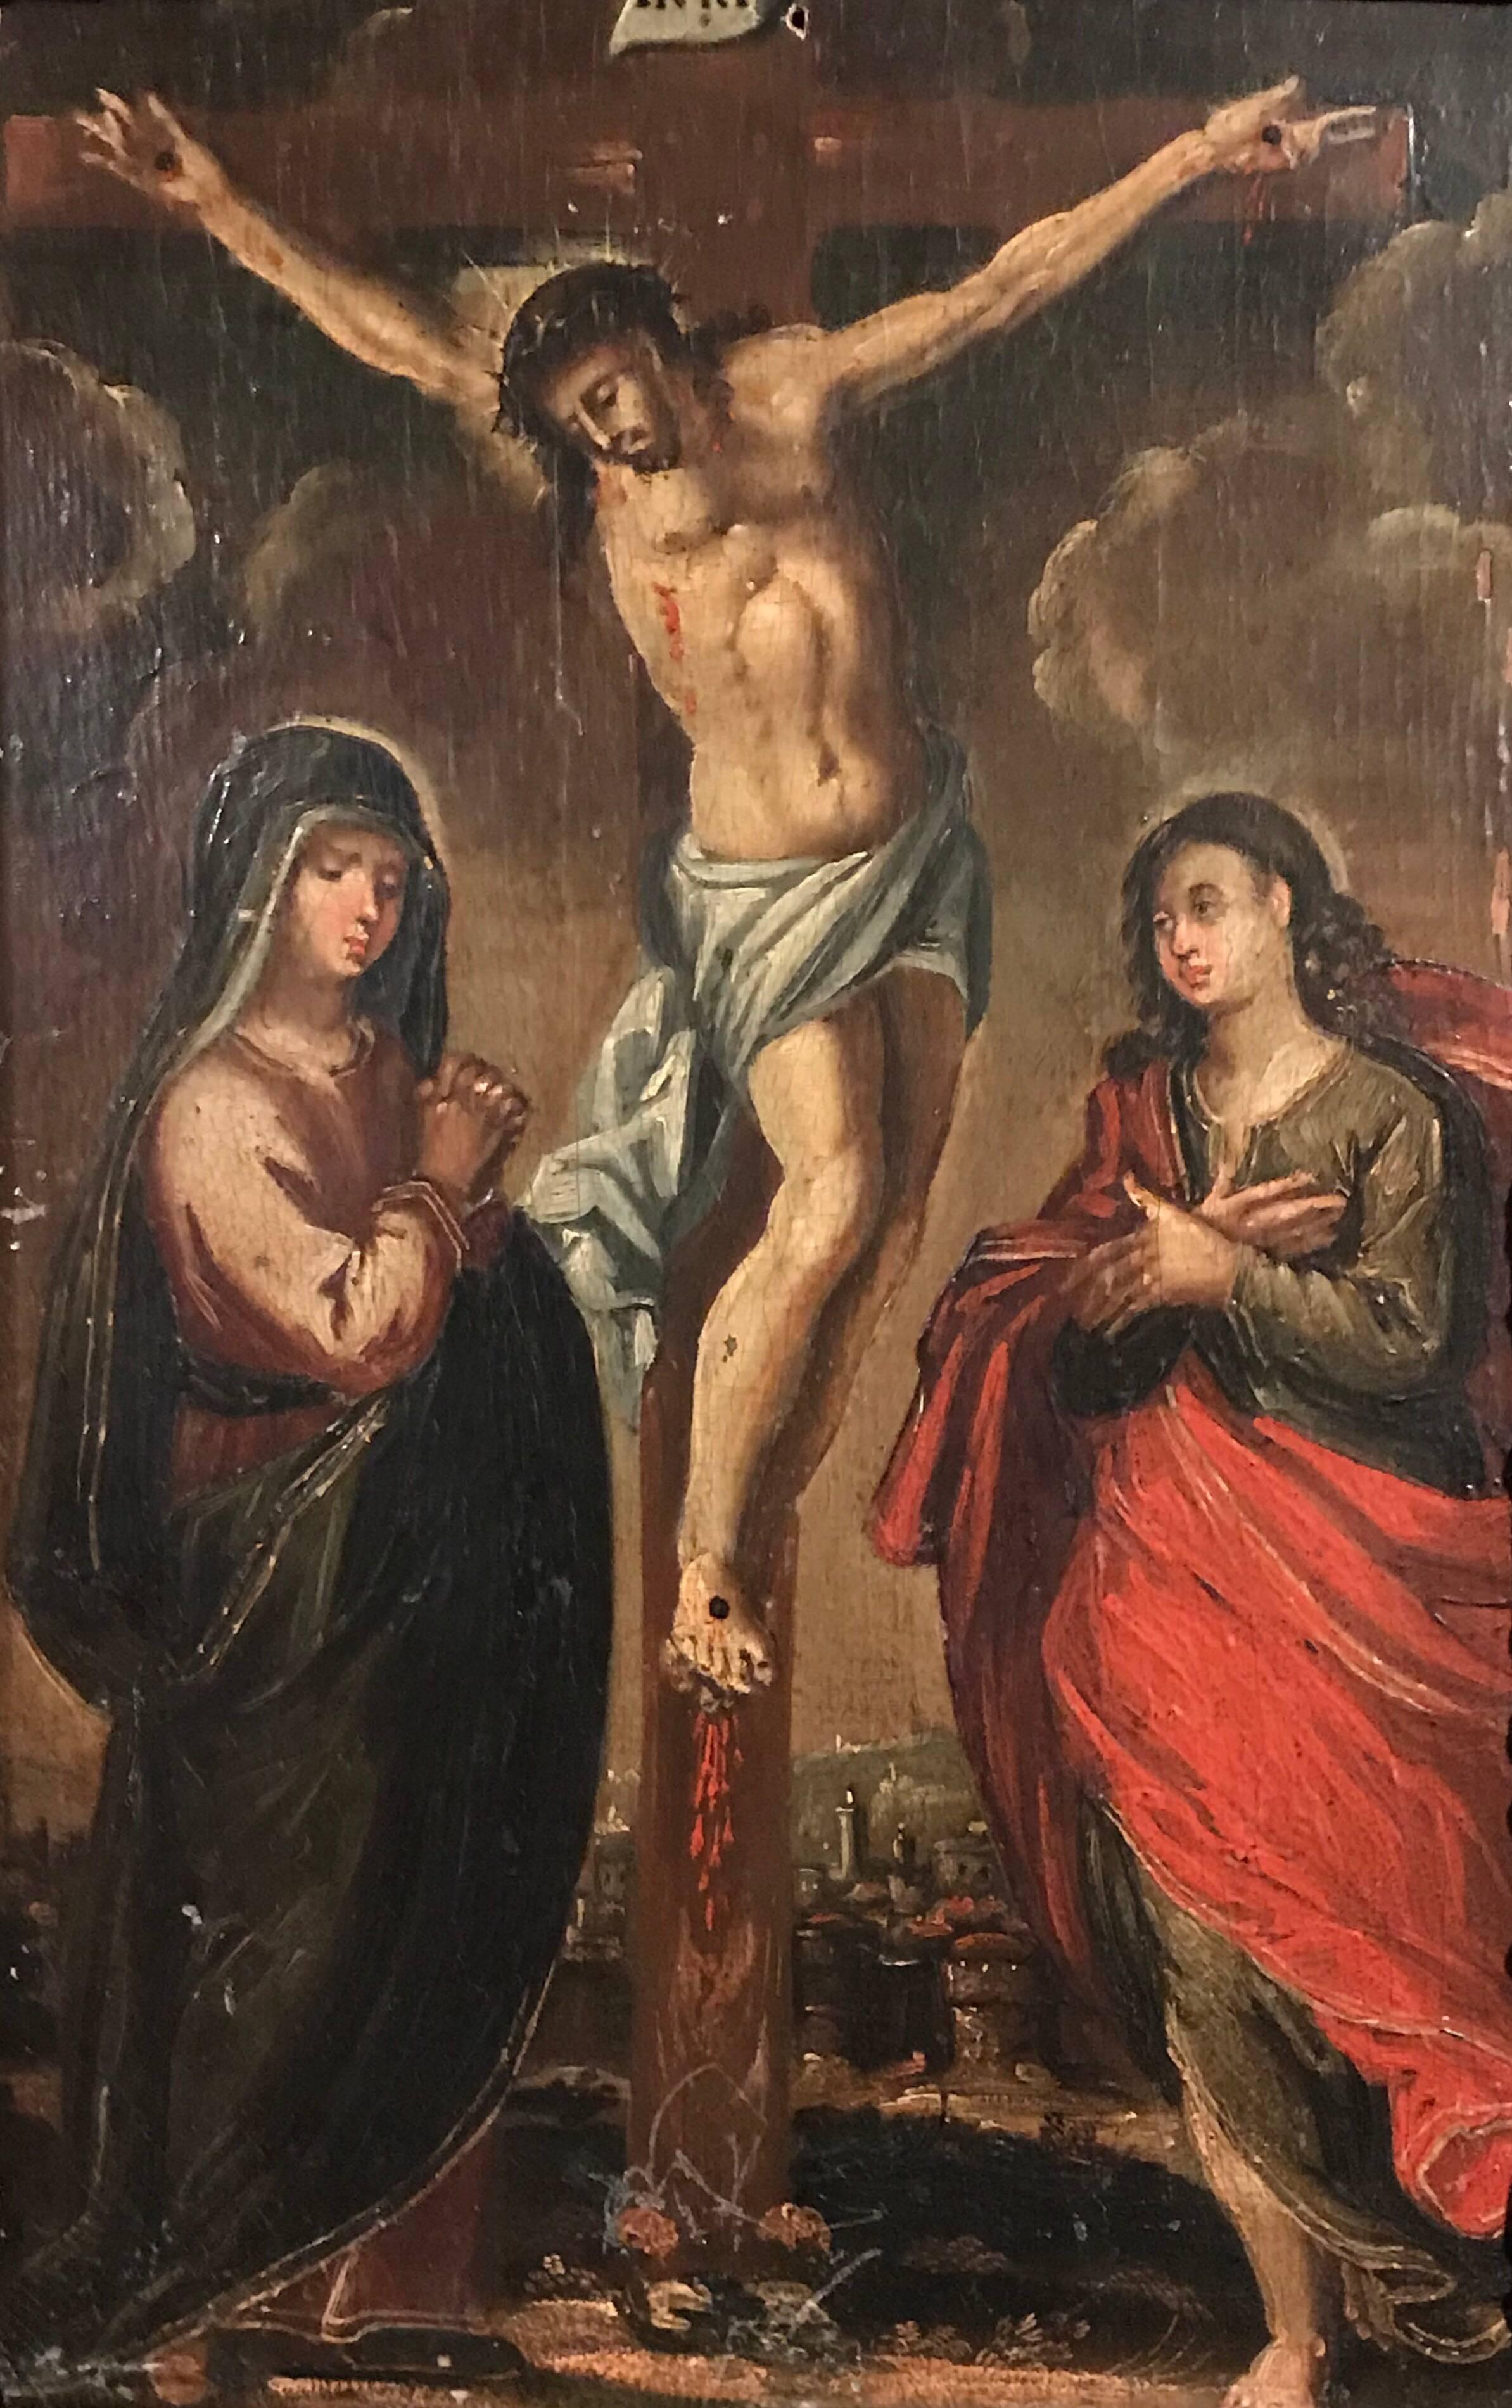 Unknown Figurative Painting - 17th Century Oil on Panel - The Crucifixion